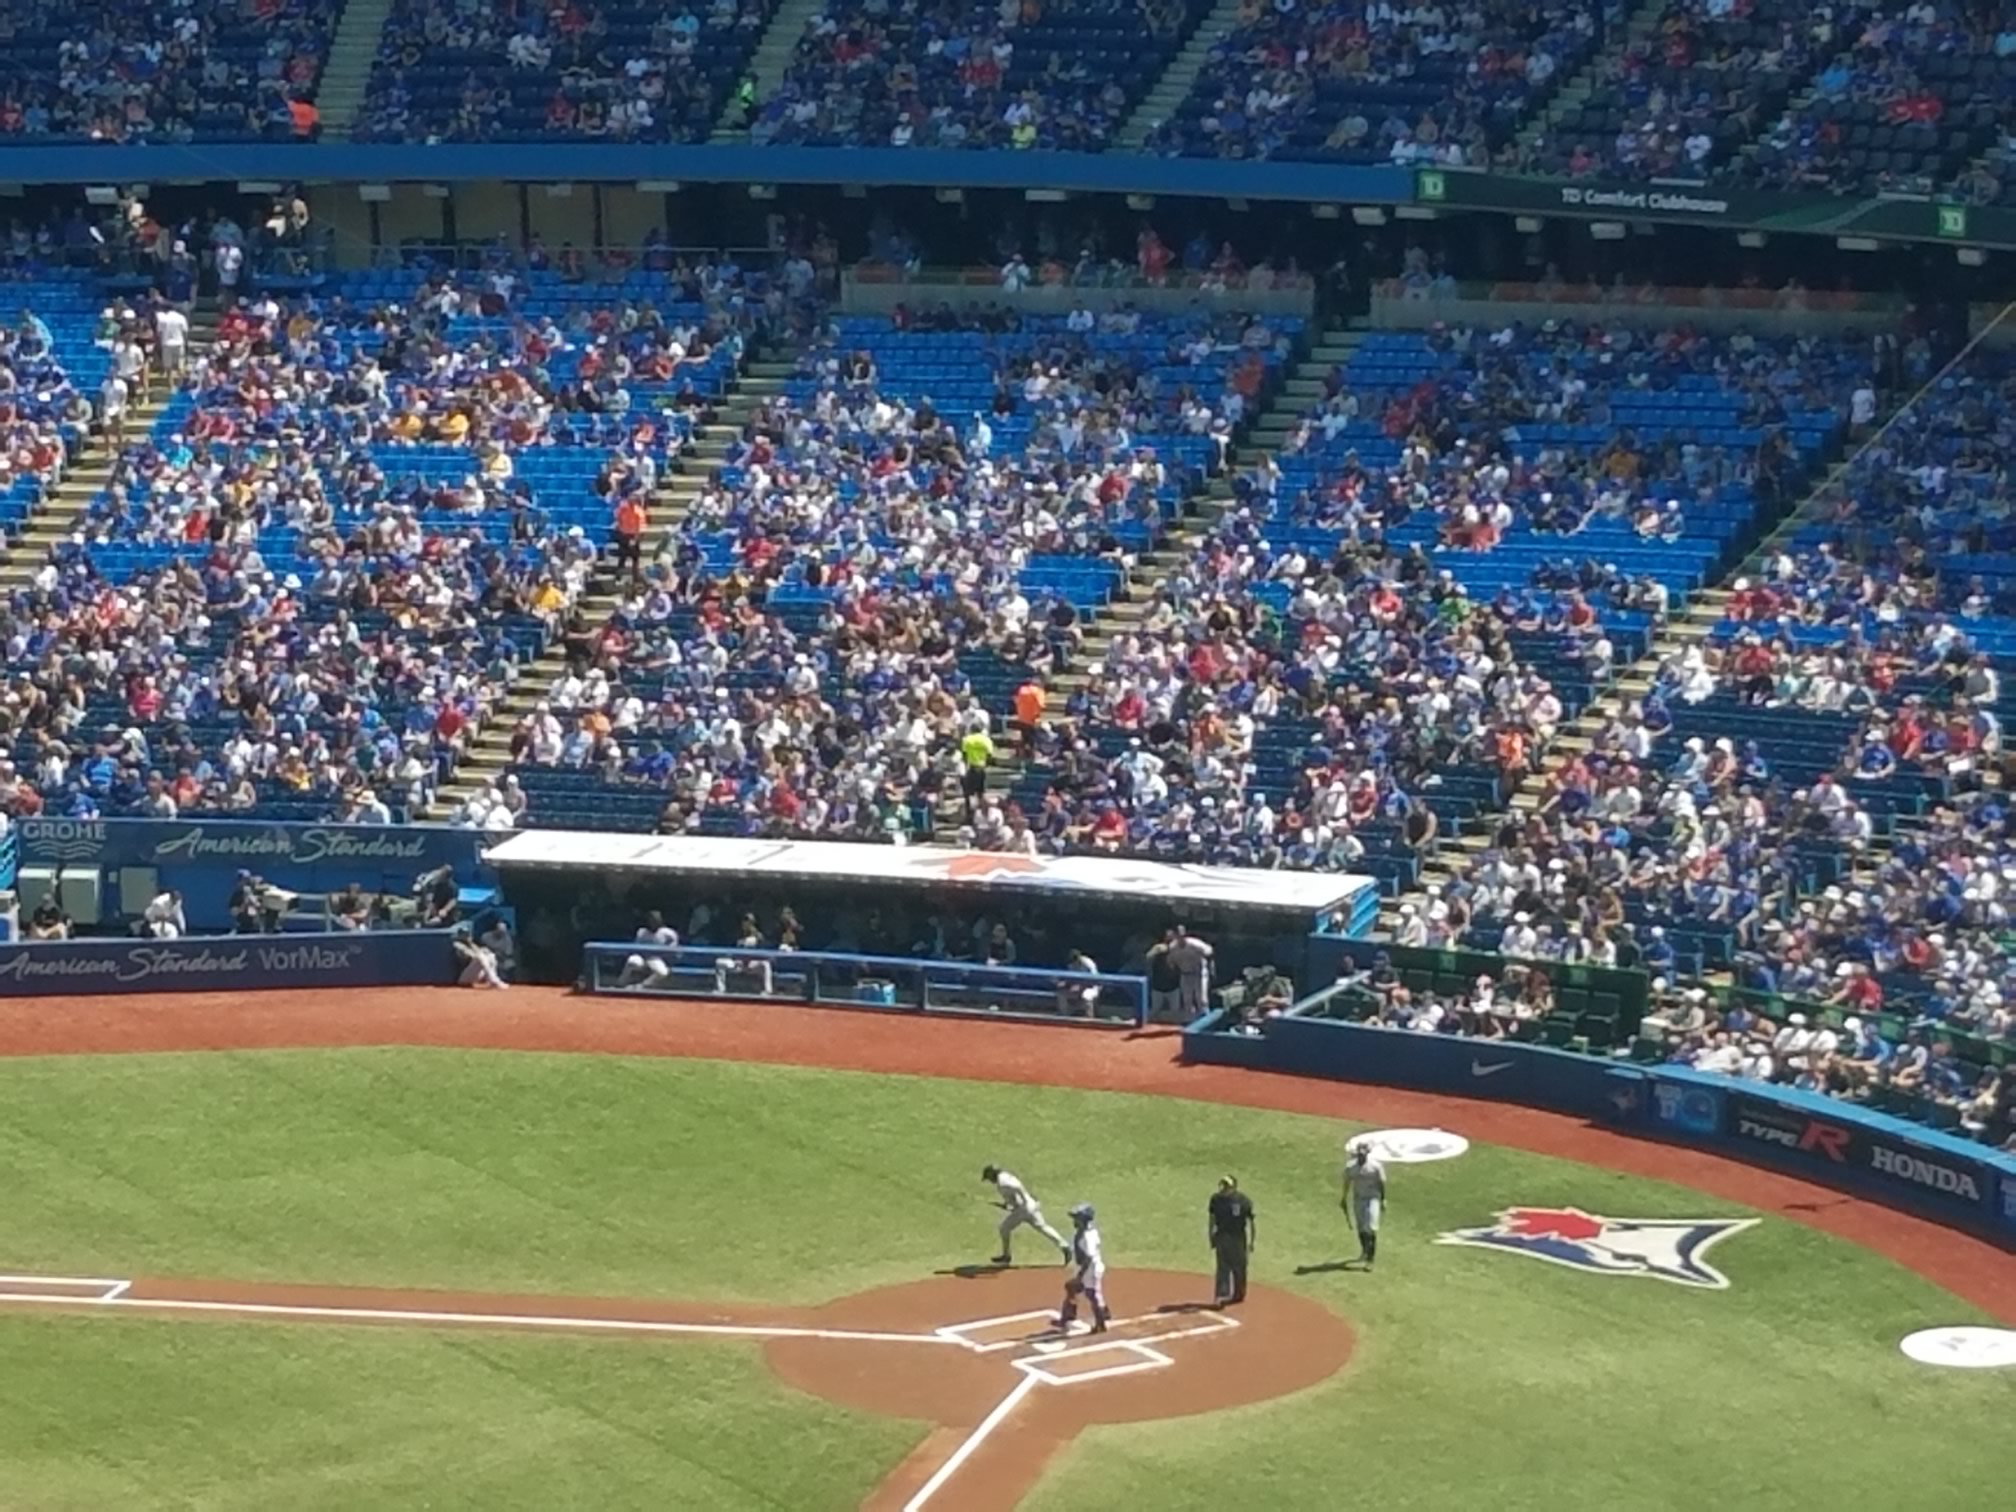 Section 117 at Rogers Centre 